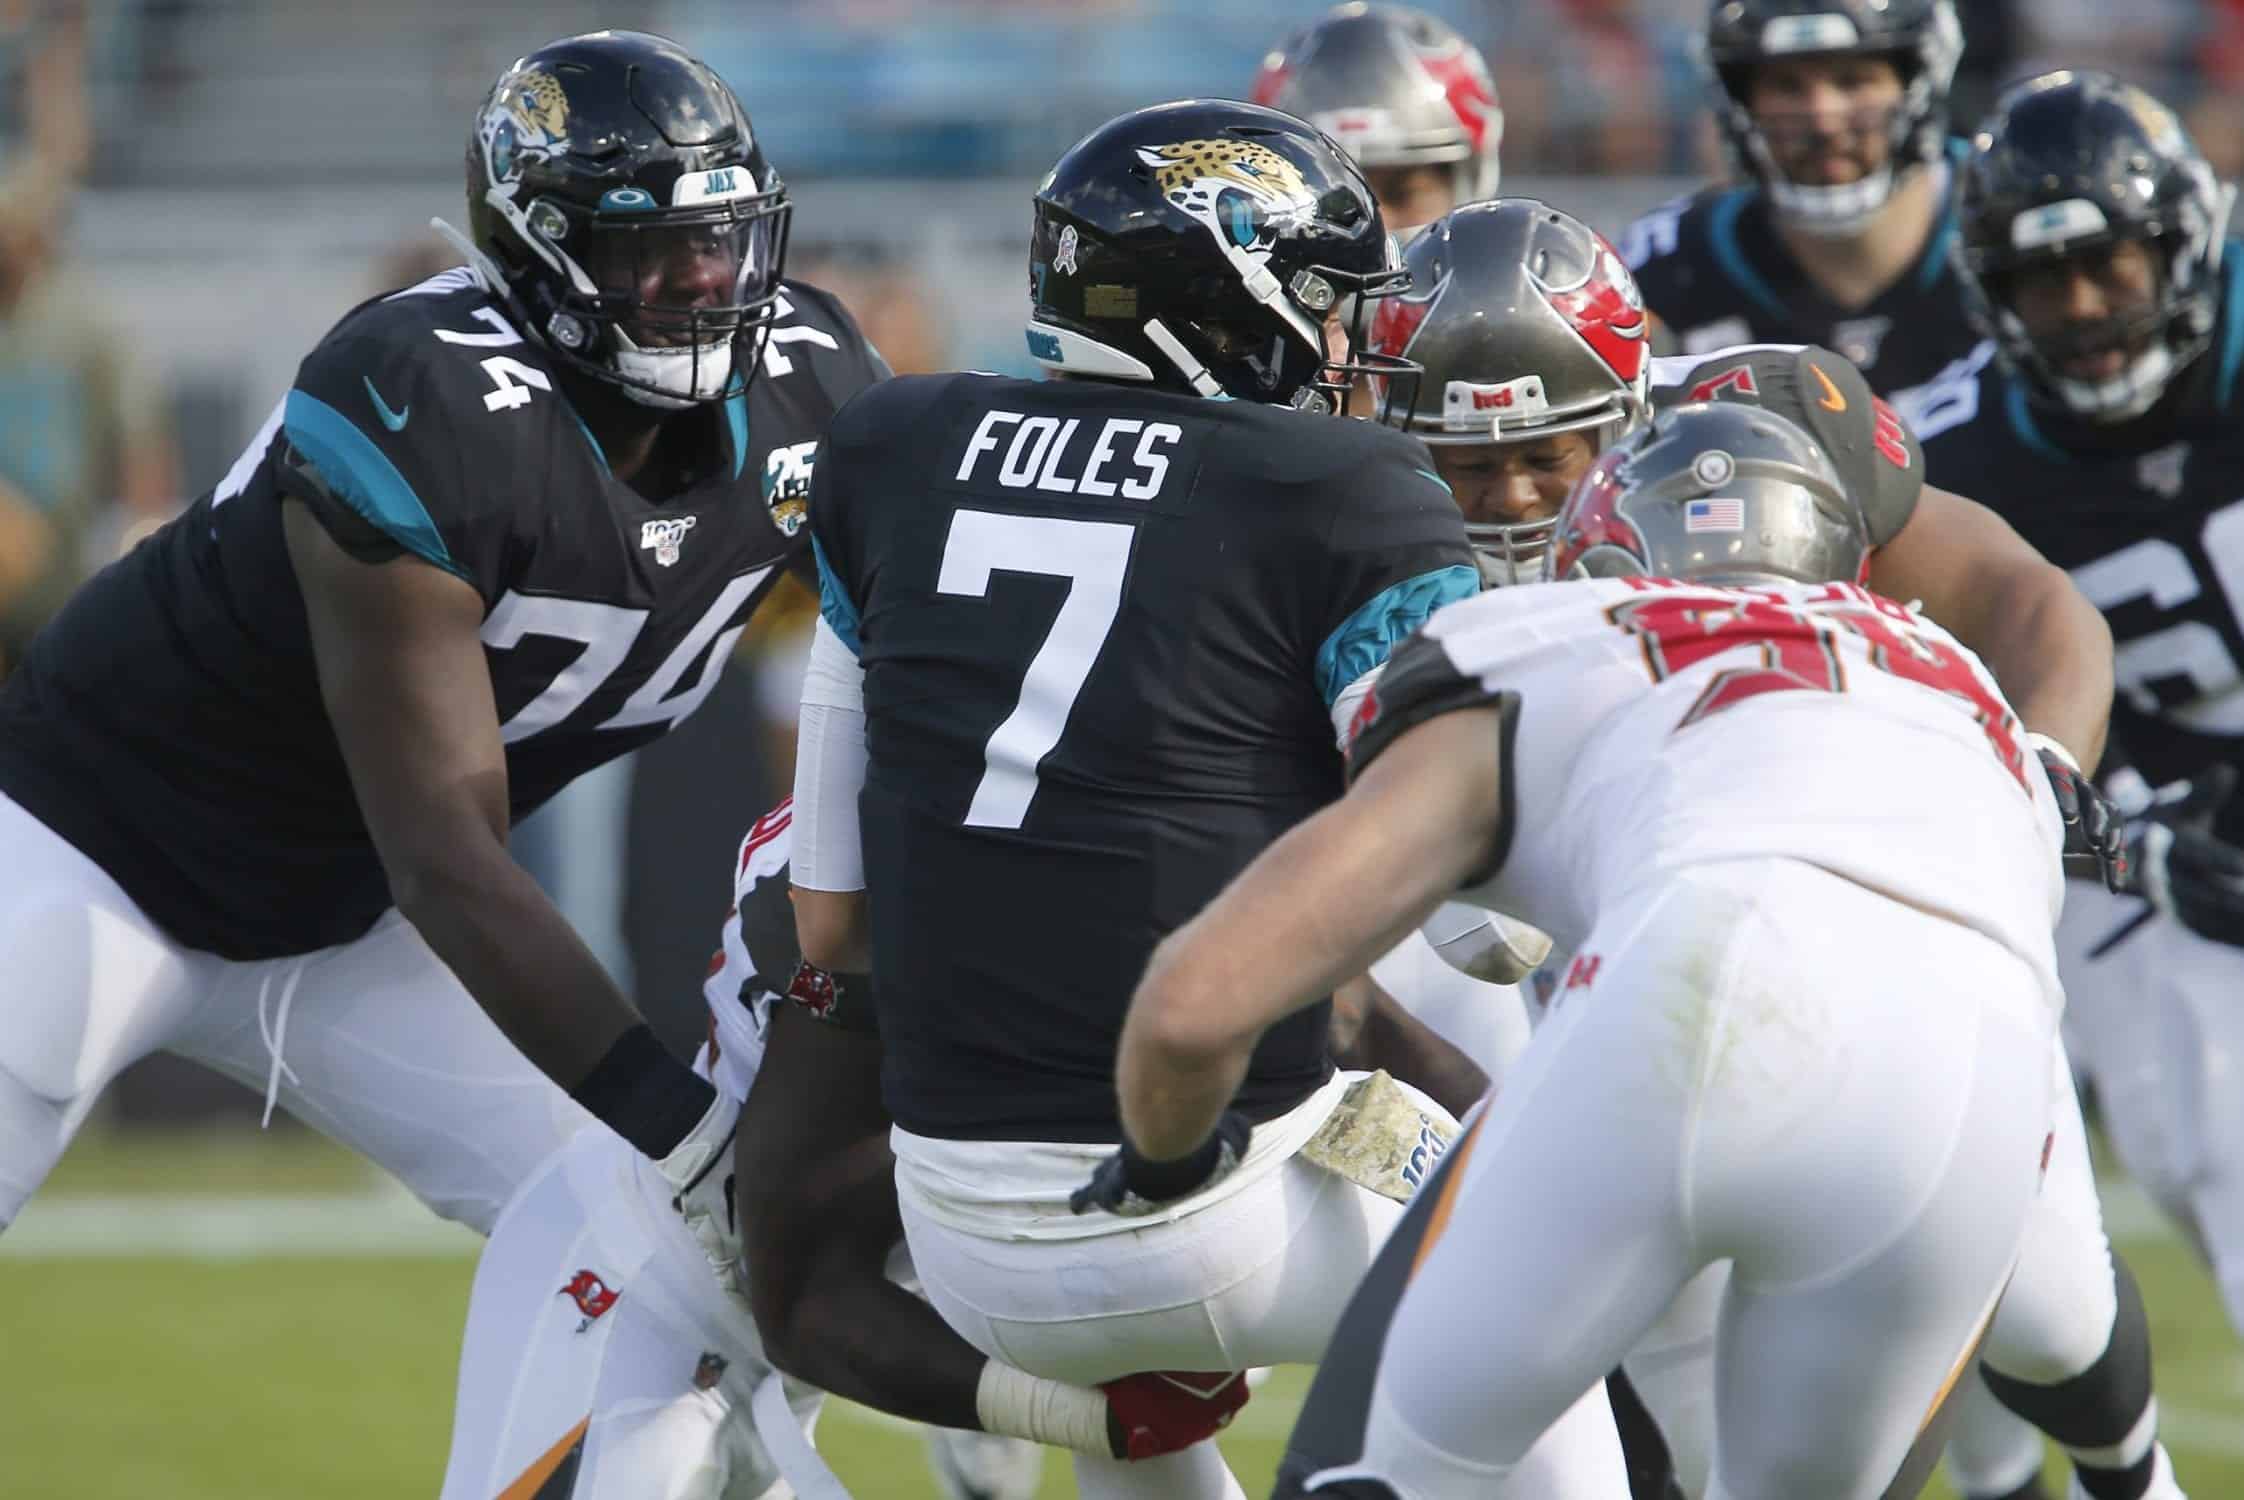 The Eagles are proving they can win even if Nick Foles struggles